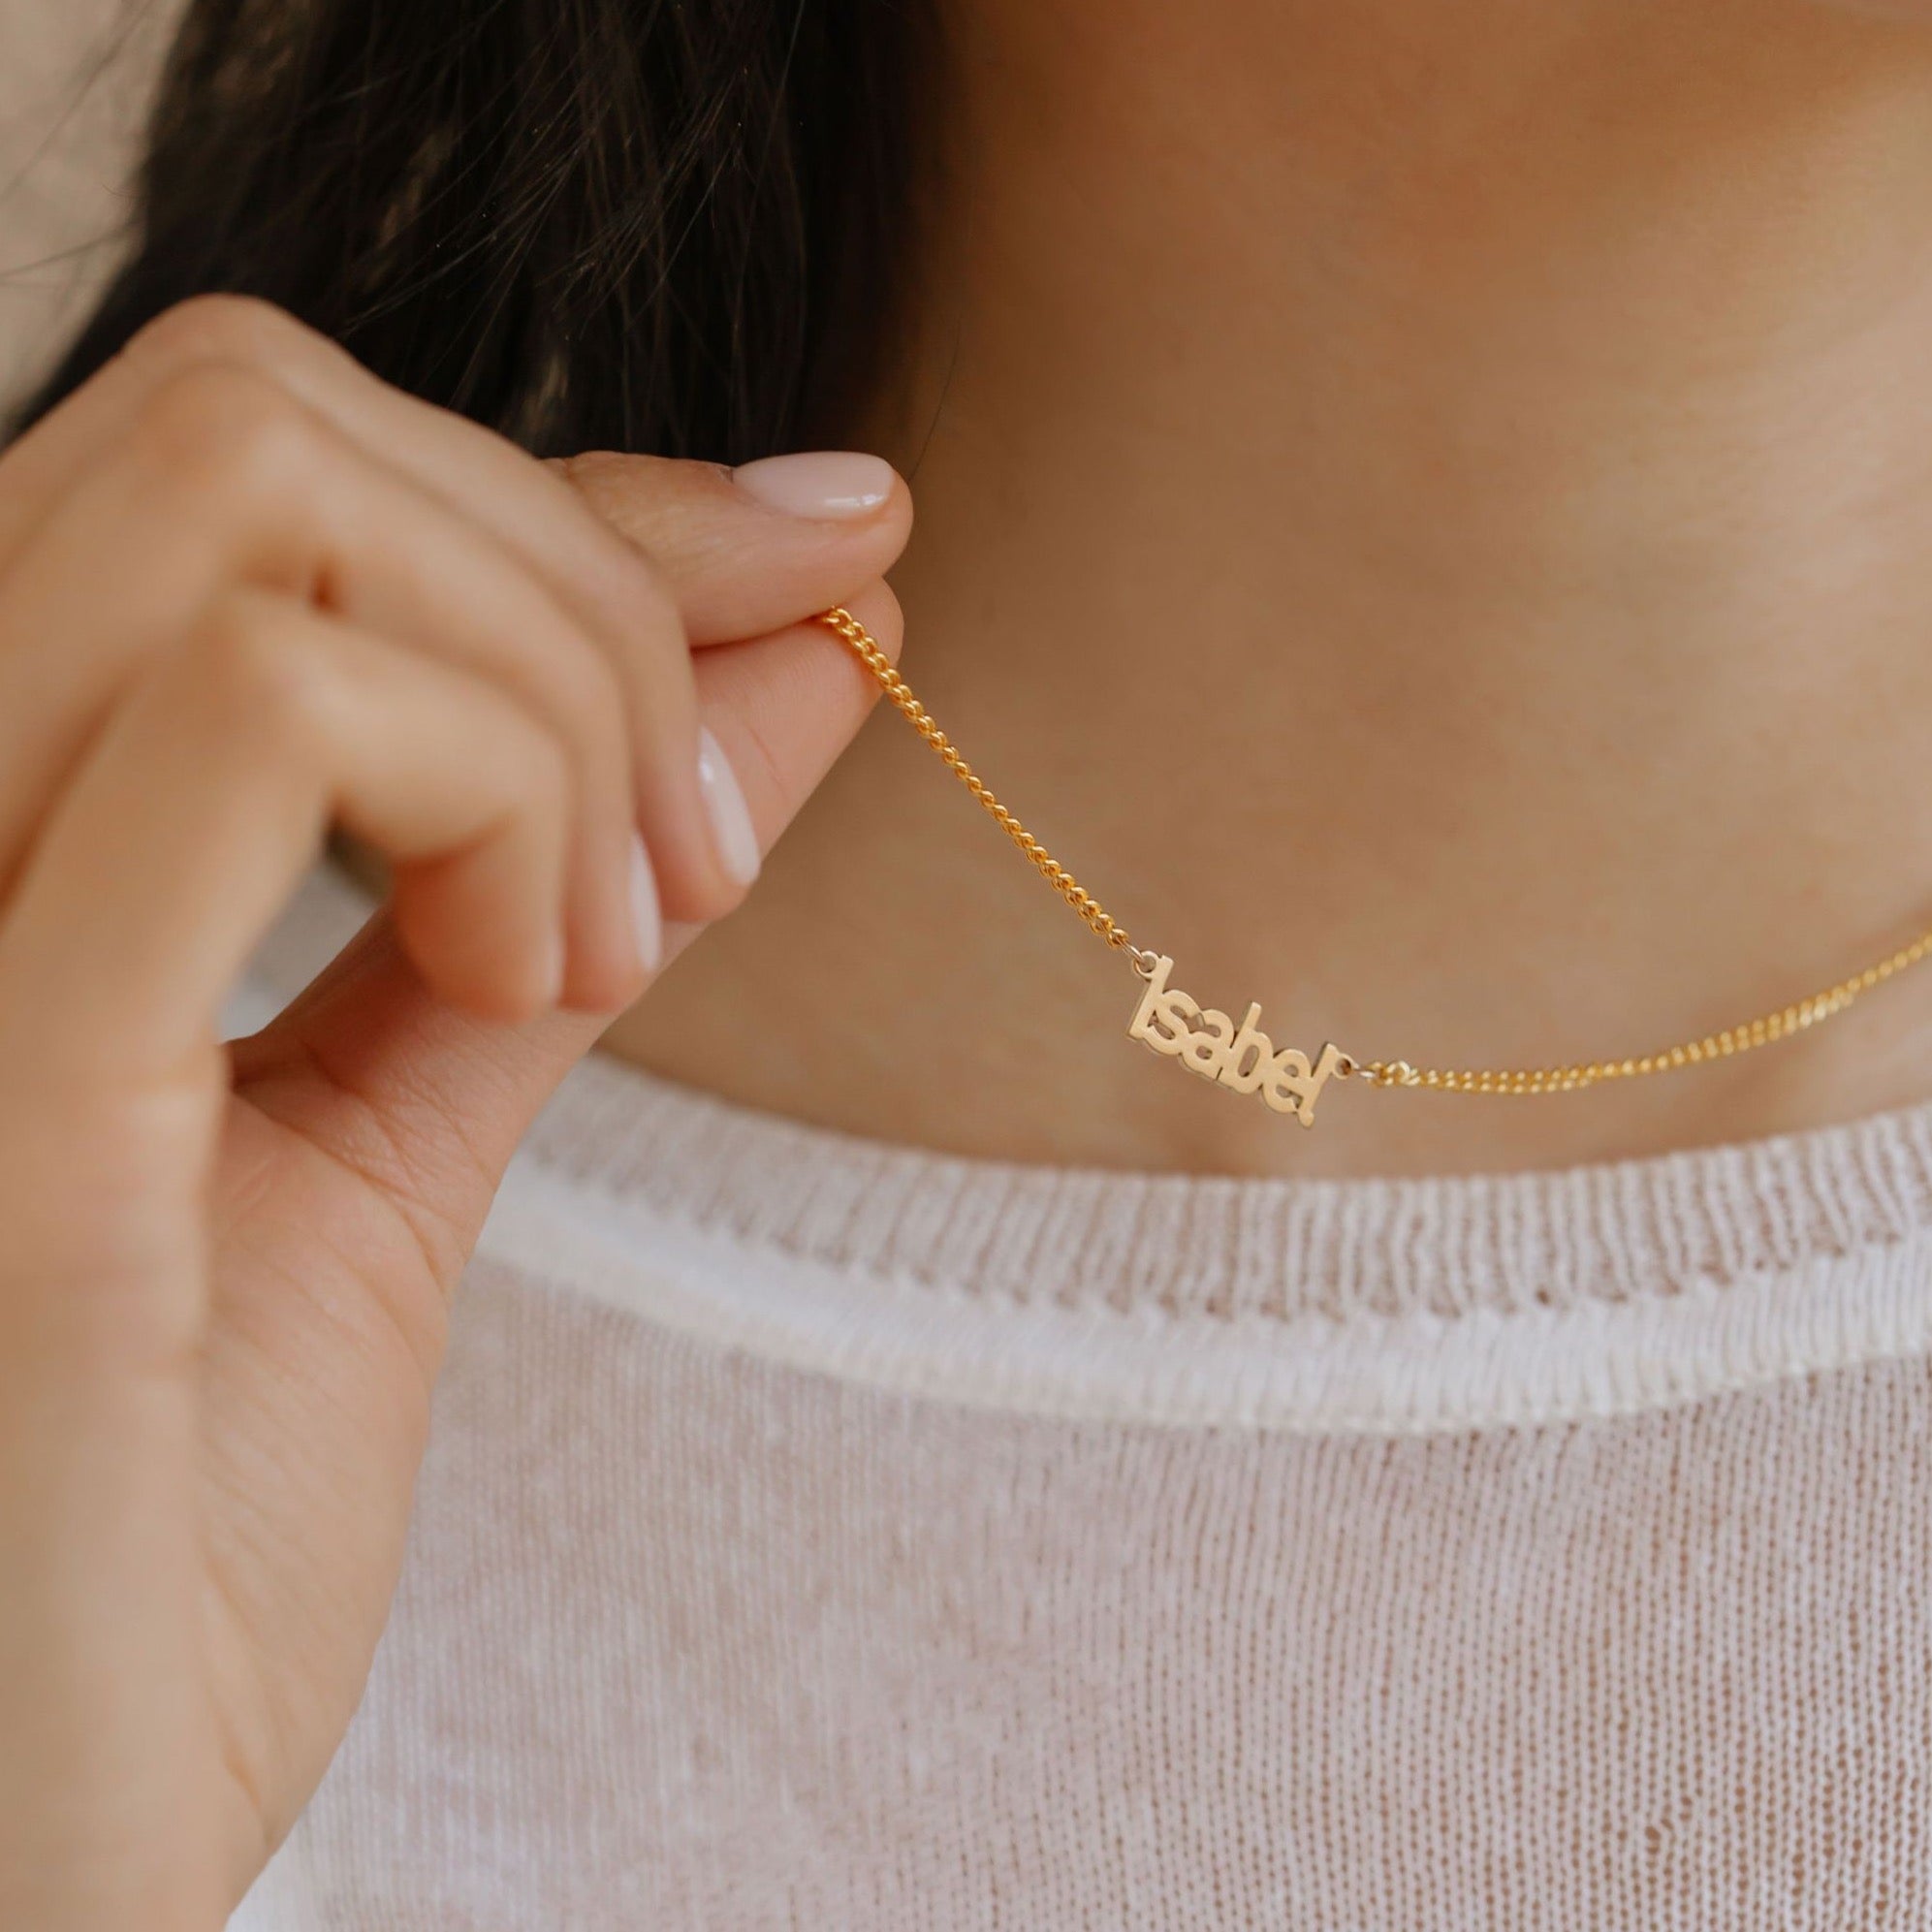 nameplate necklace with luxury double curb chain in gold